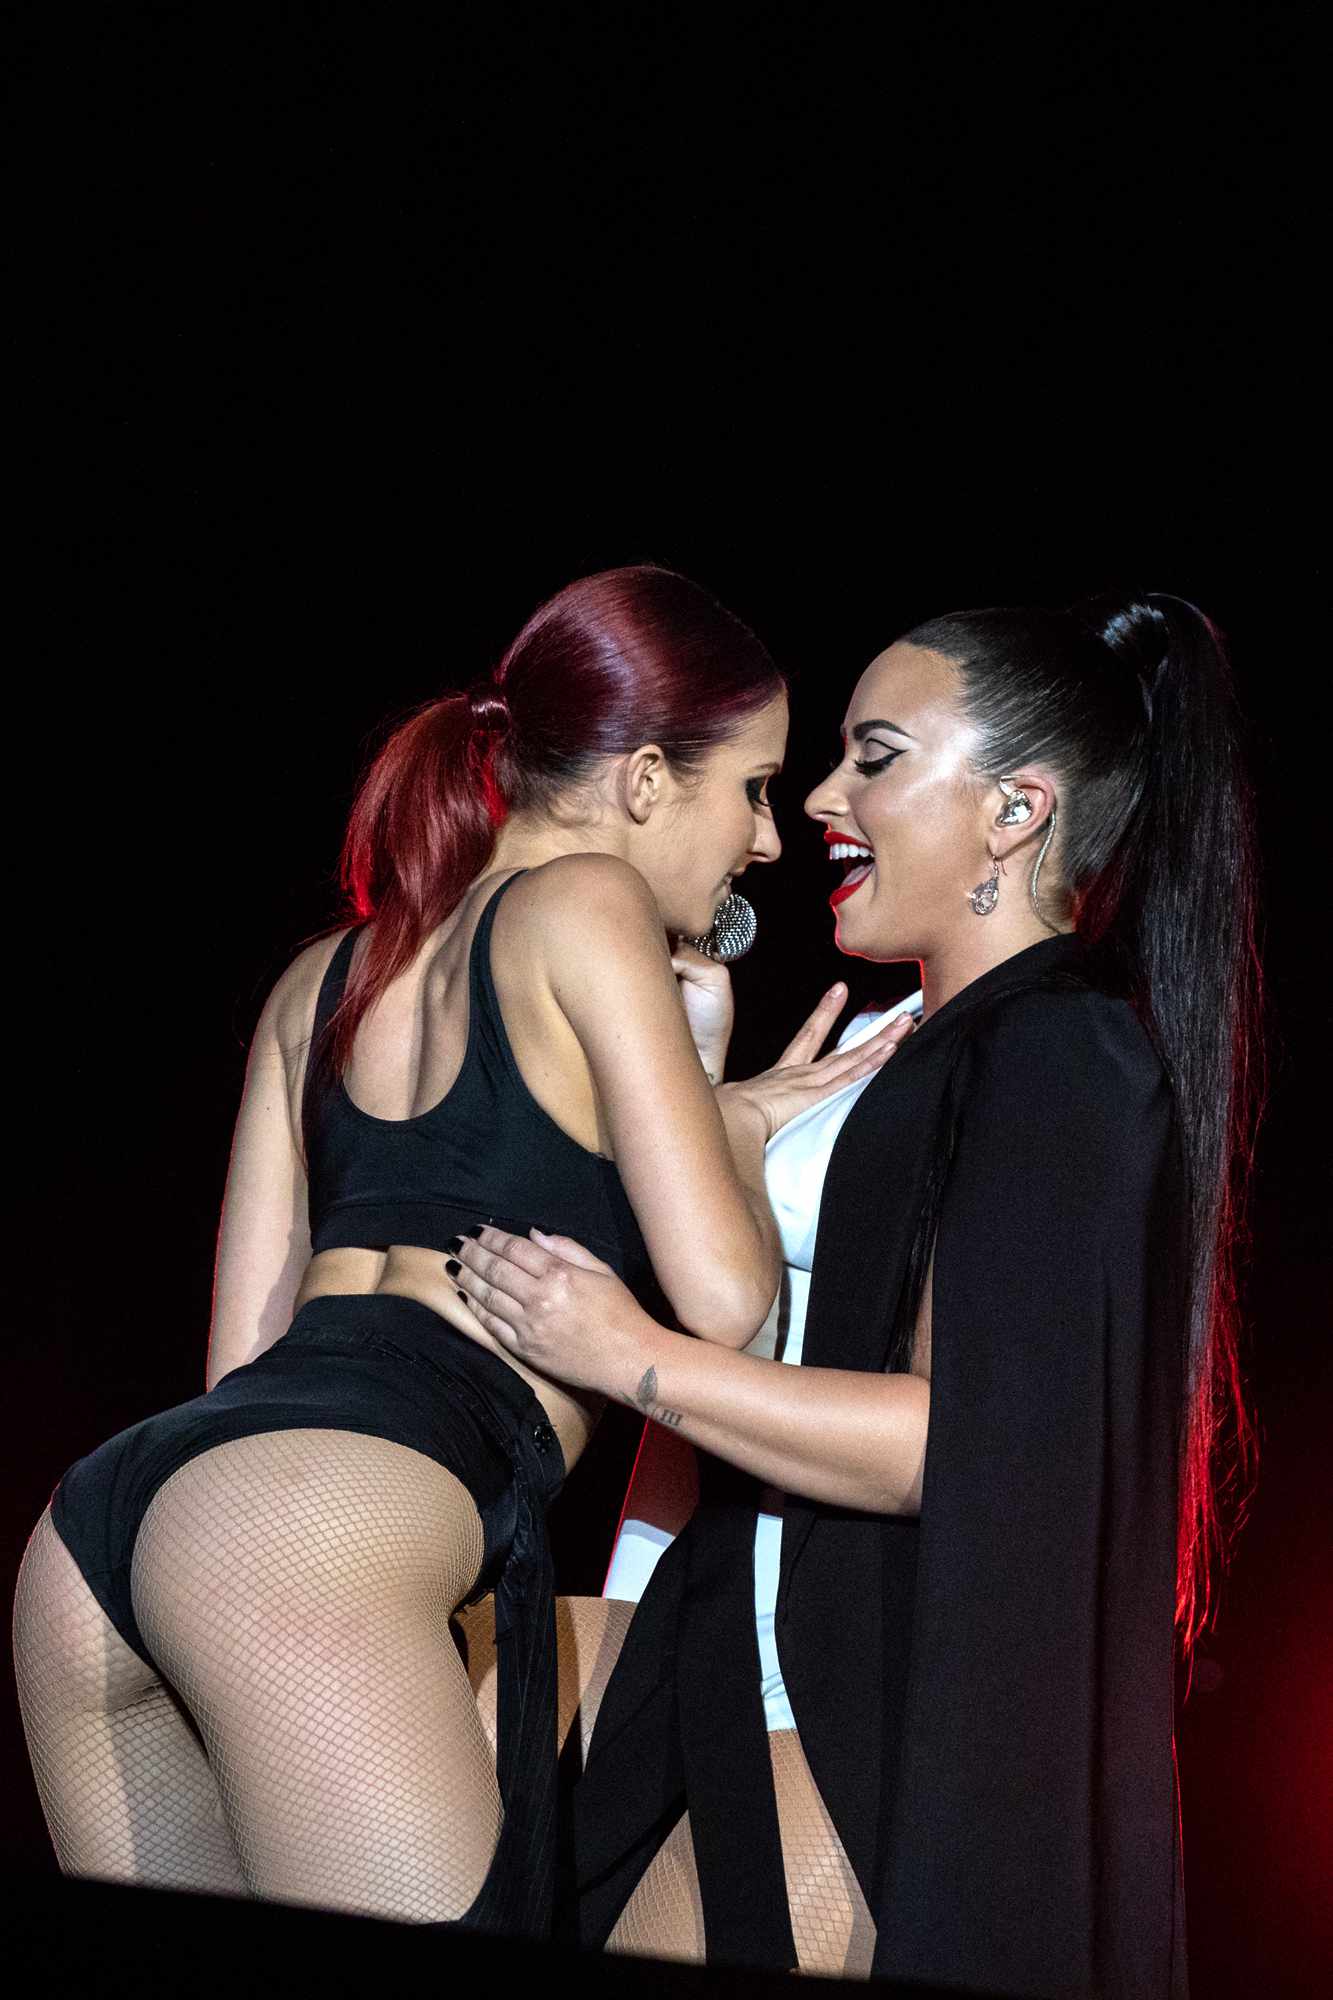 Demi Lovato puts on a raunchy performance at festival